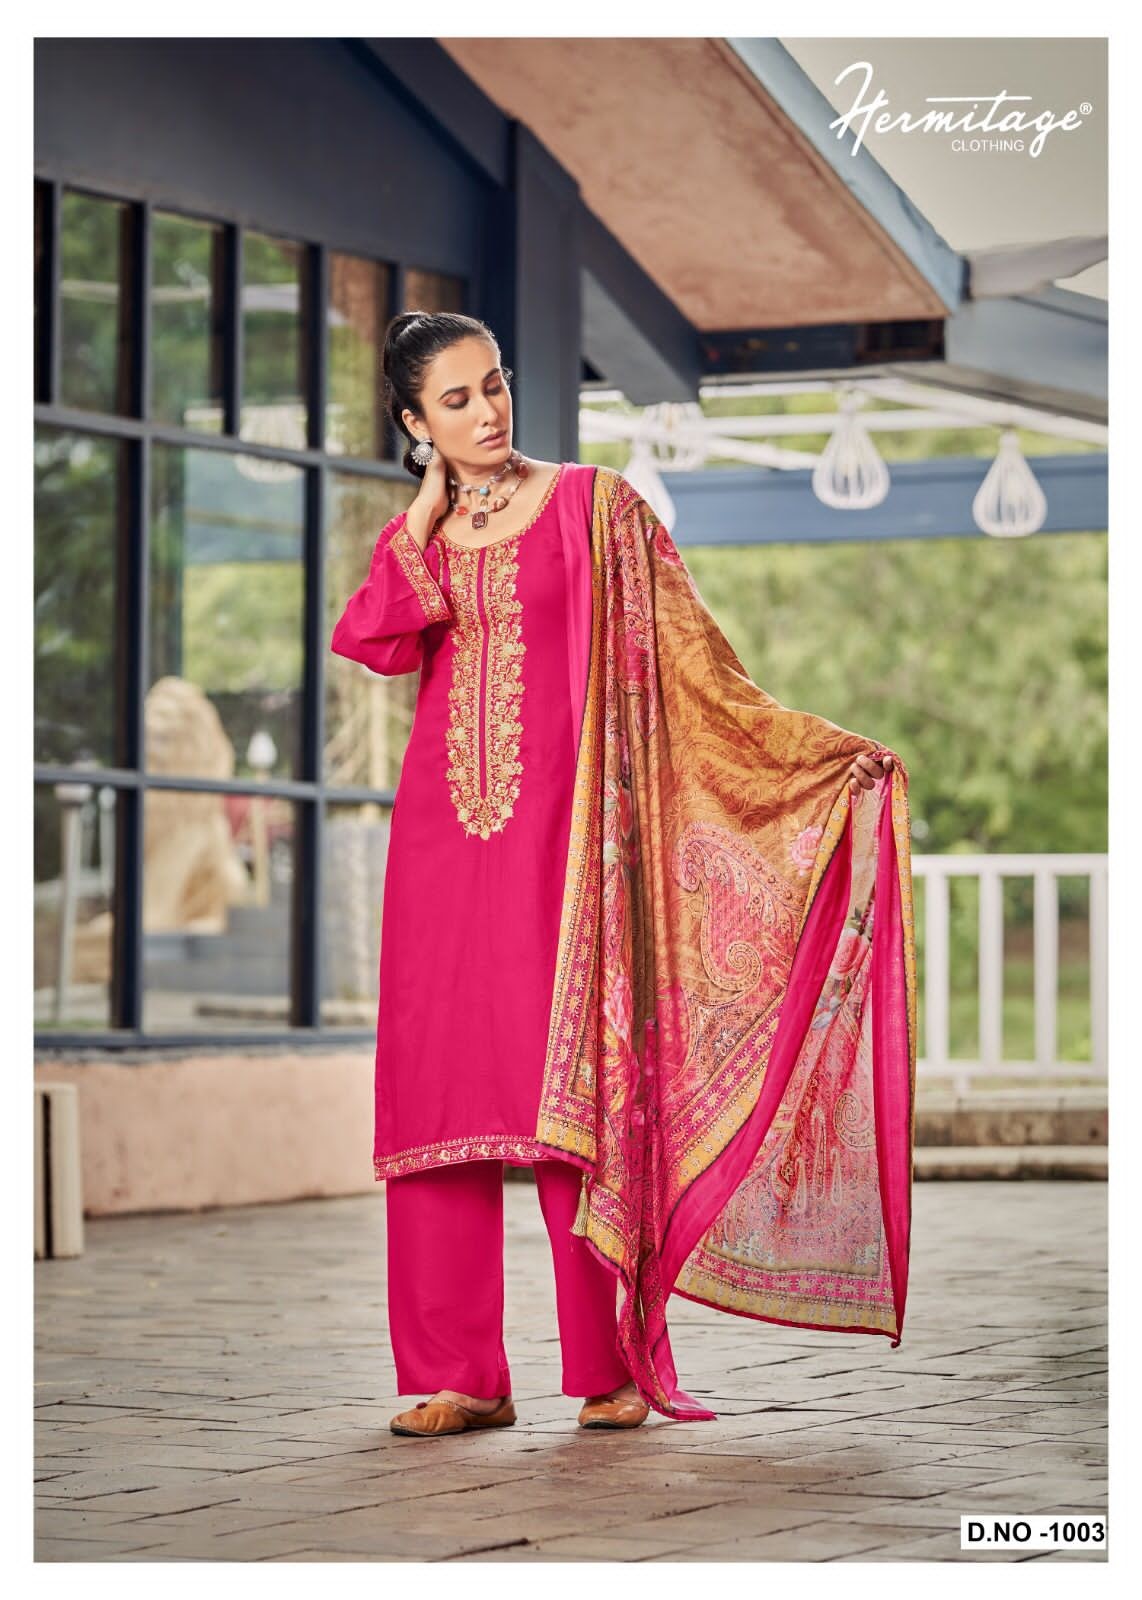 Begum Hermitage Clothing Viscose Pant Style Suits